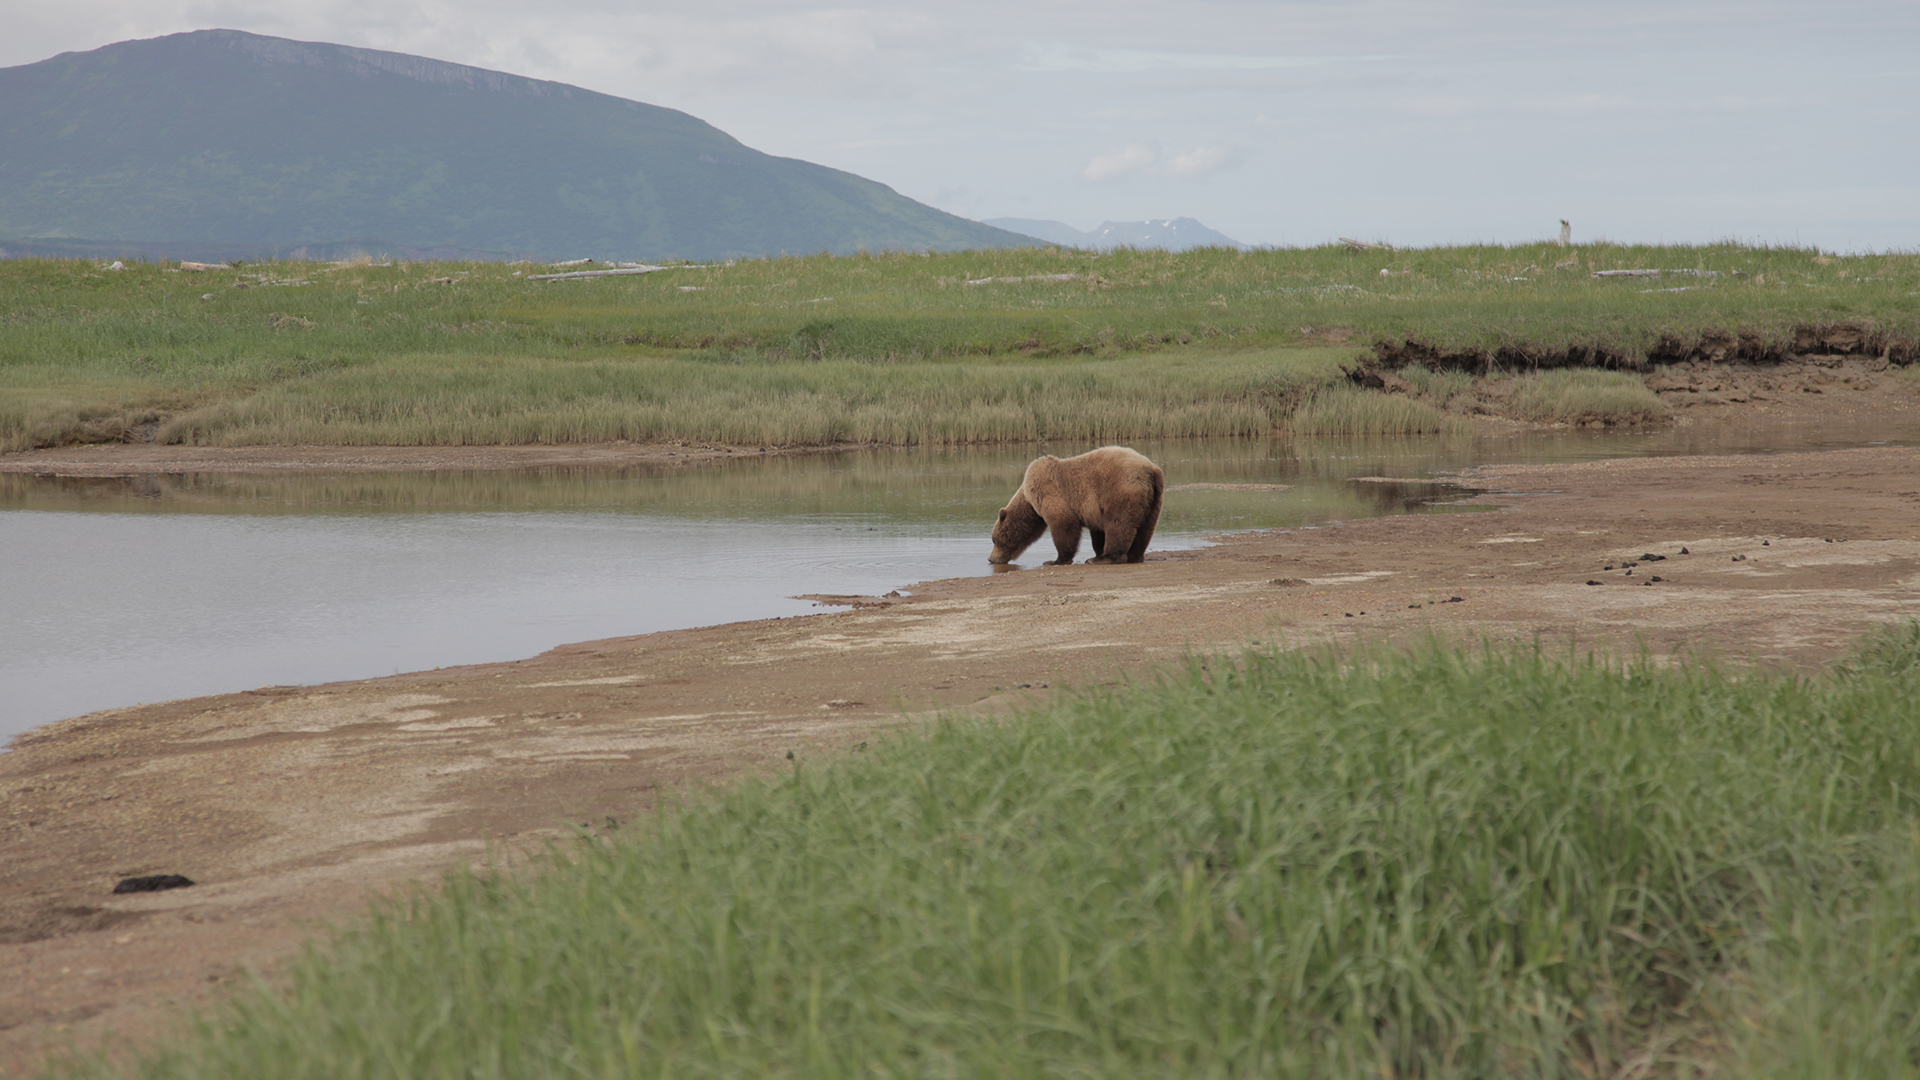 Katmai National Park, AK - A thirsty grizzly bear take a drink from a stream on a warm June day.... [Photo of the day - June 2022]